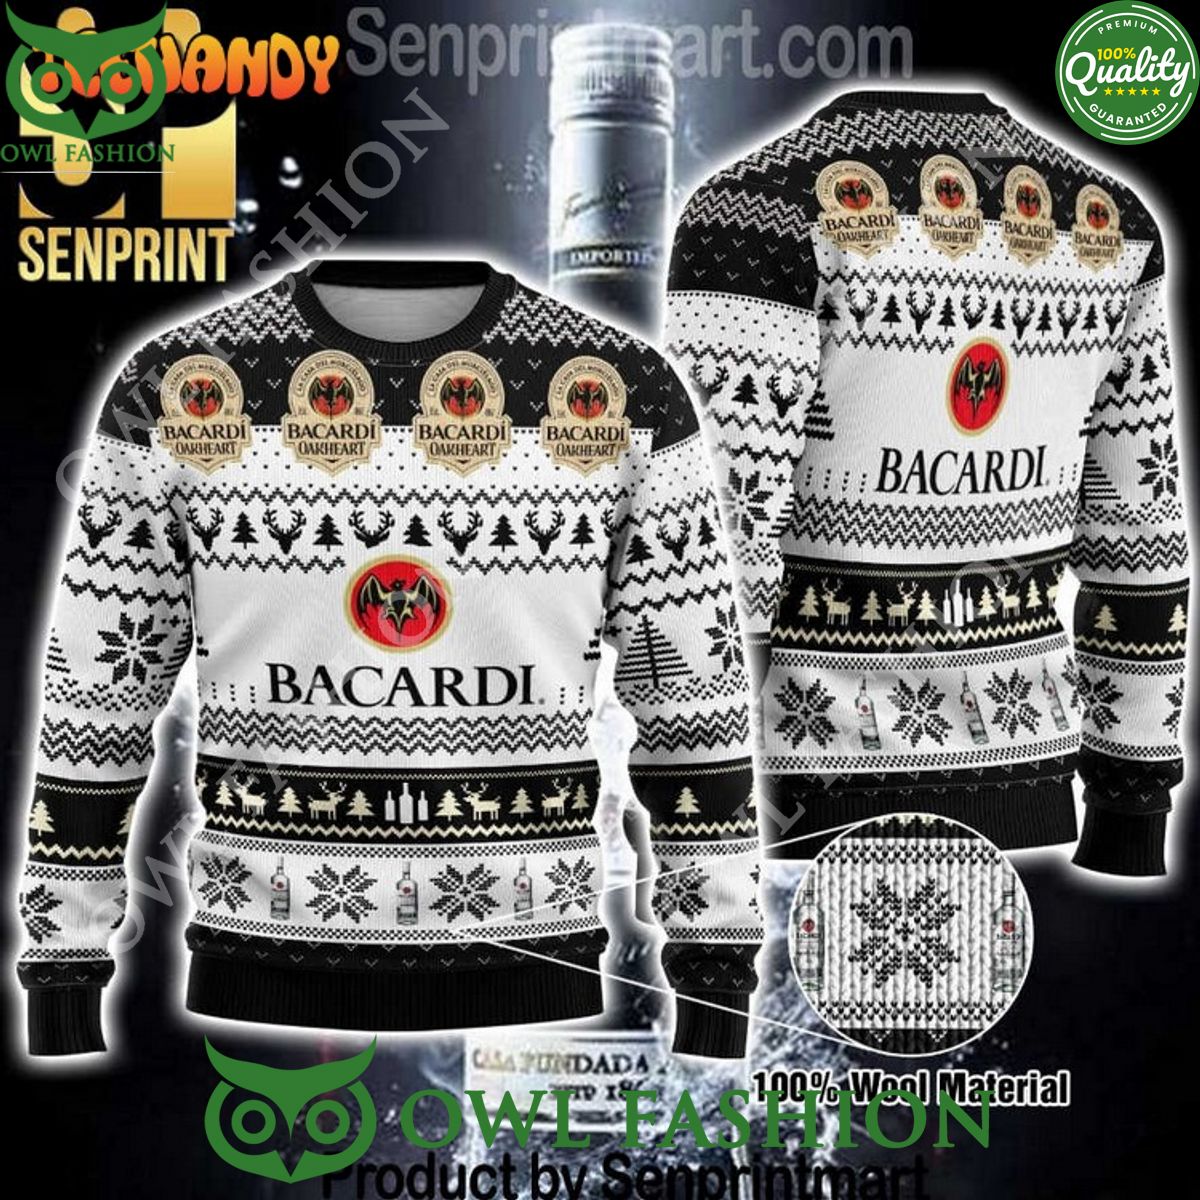 bacardi wine chirtmas gifts full printing knitted ugly sweater 1 3dcPs.jpg